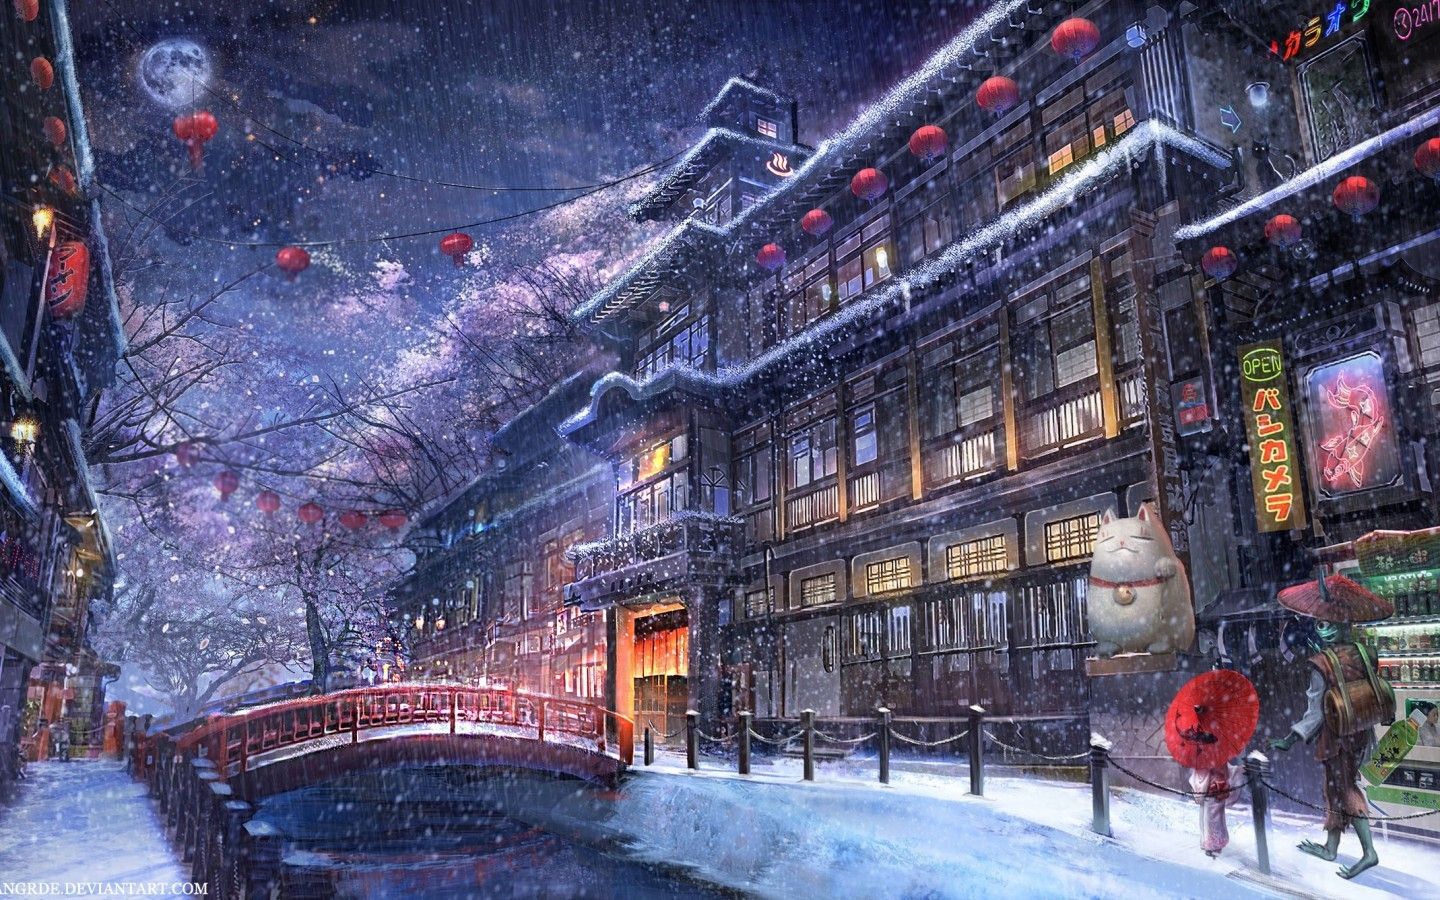 Download 1440x900 Anime Traditional City, Raining, Snow, Moon, People, River Wallpaper for MacBook Pro 15 inch, MacBook Air 13 inch